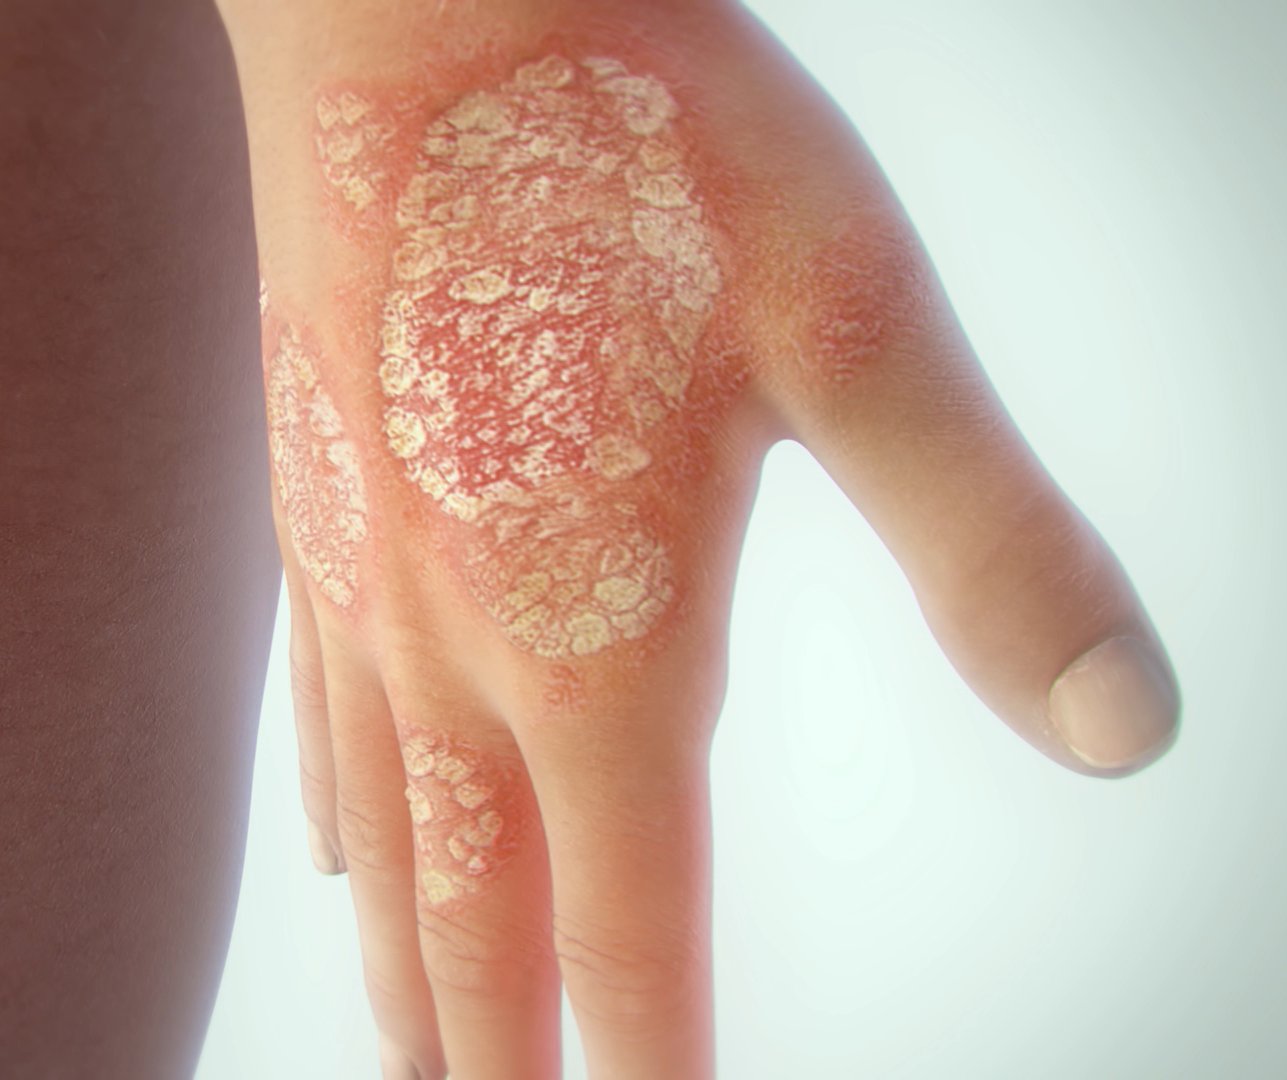 latest research on psoriasis